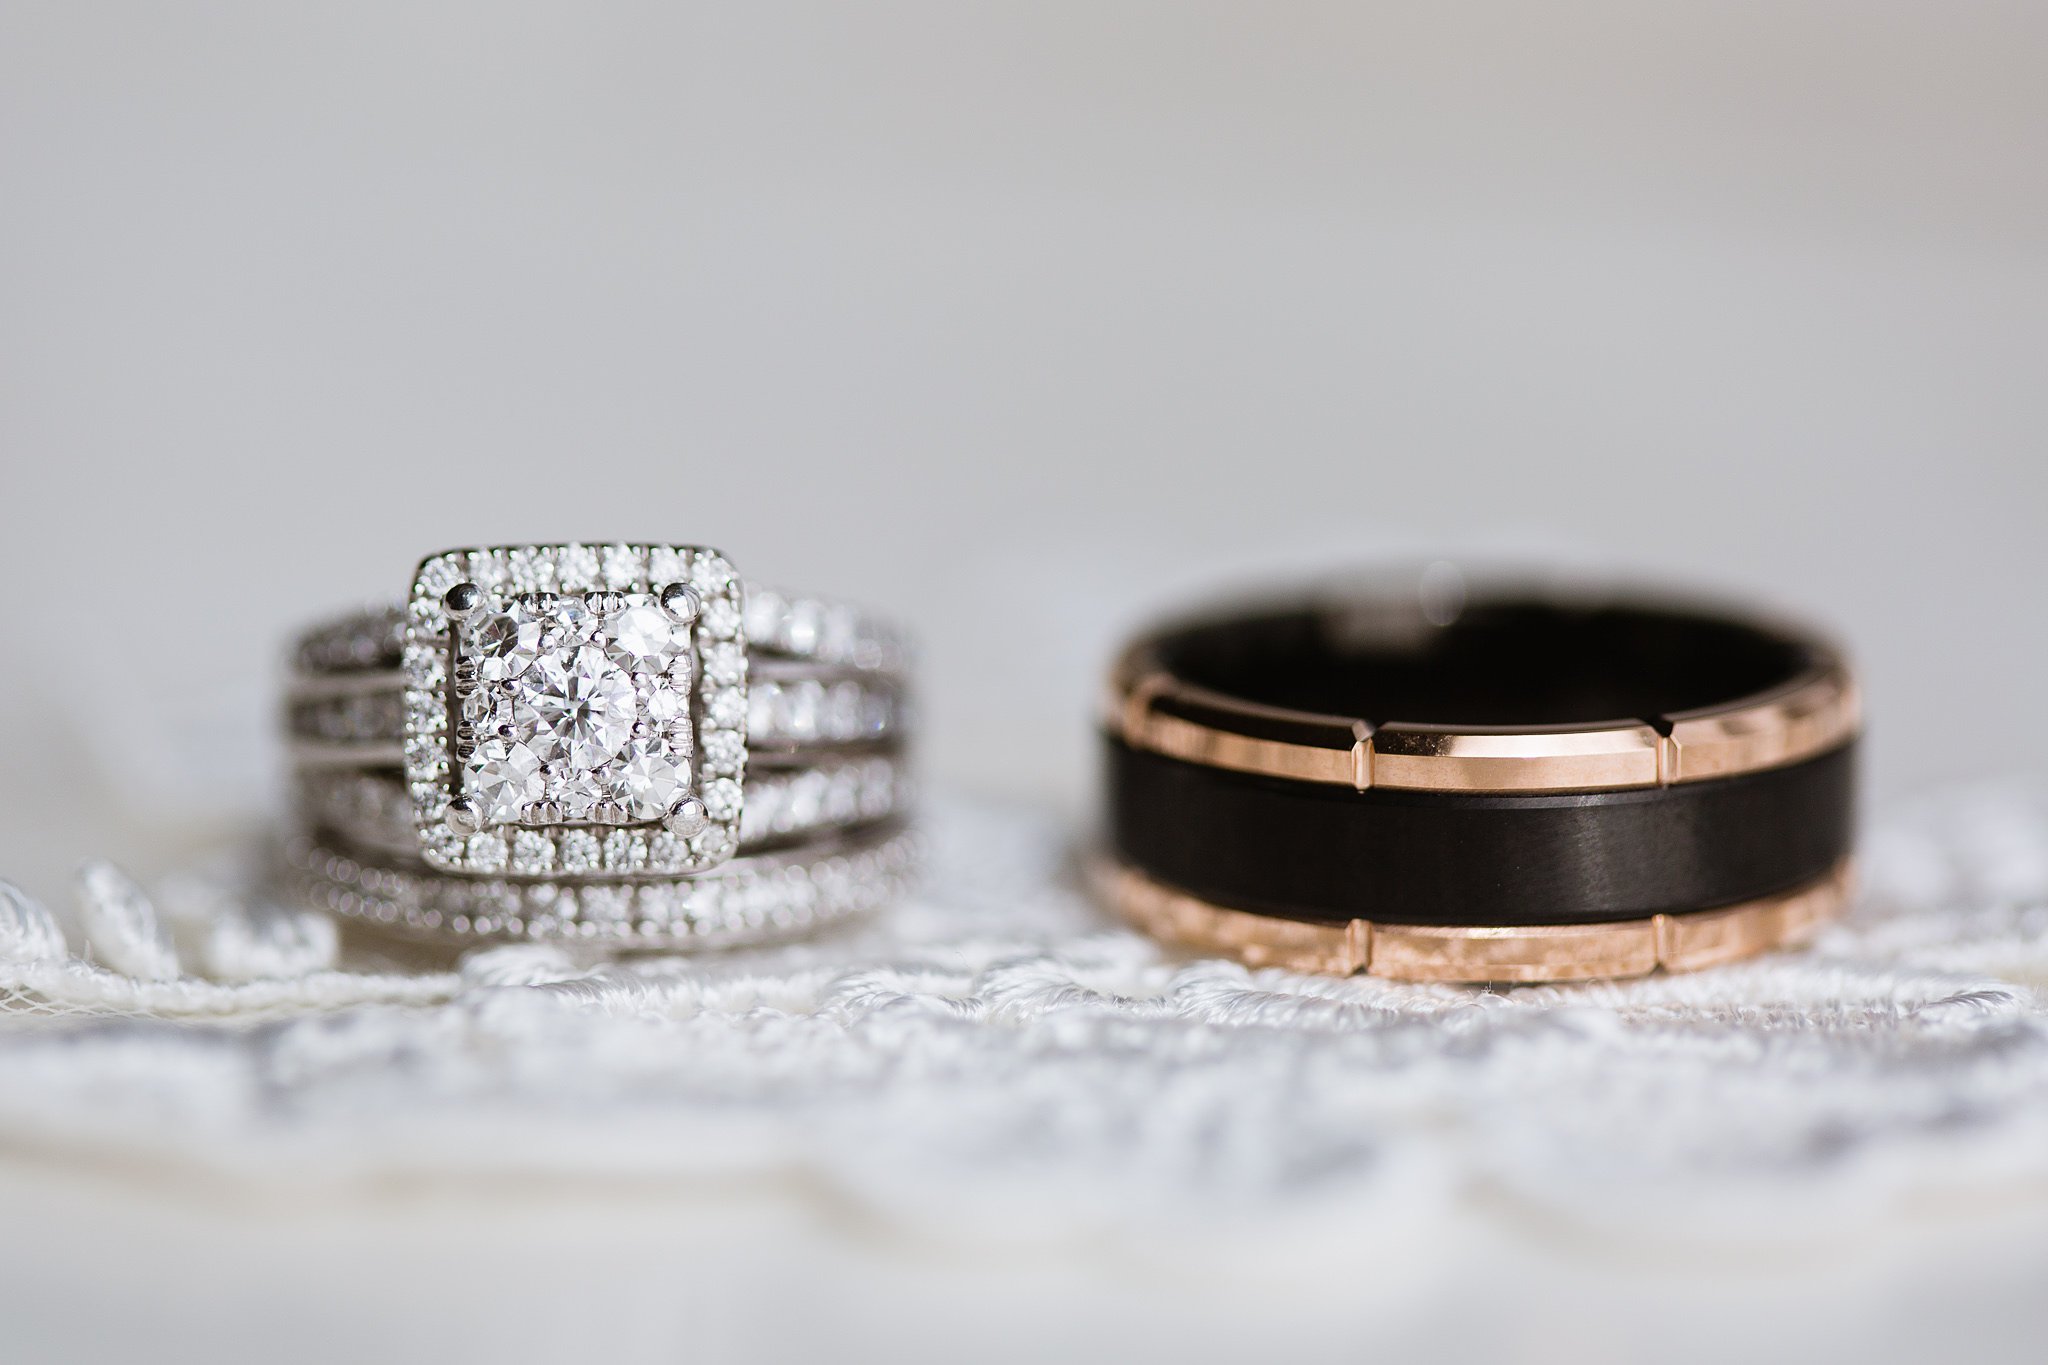 Close up images of bride's square white gold and diamond wedding ring and groom's black and gold wedding band.